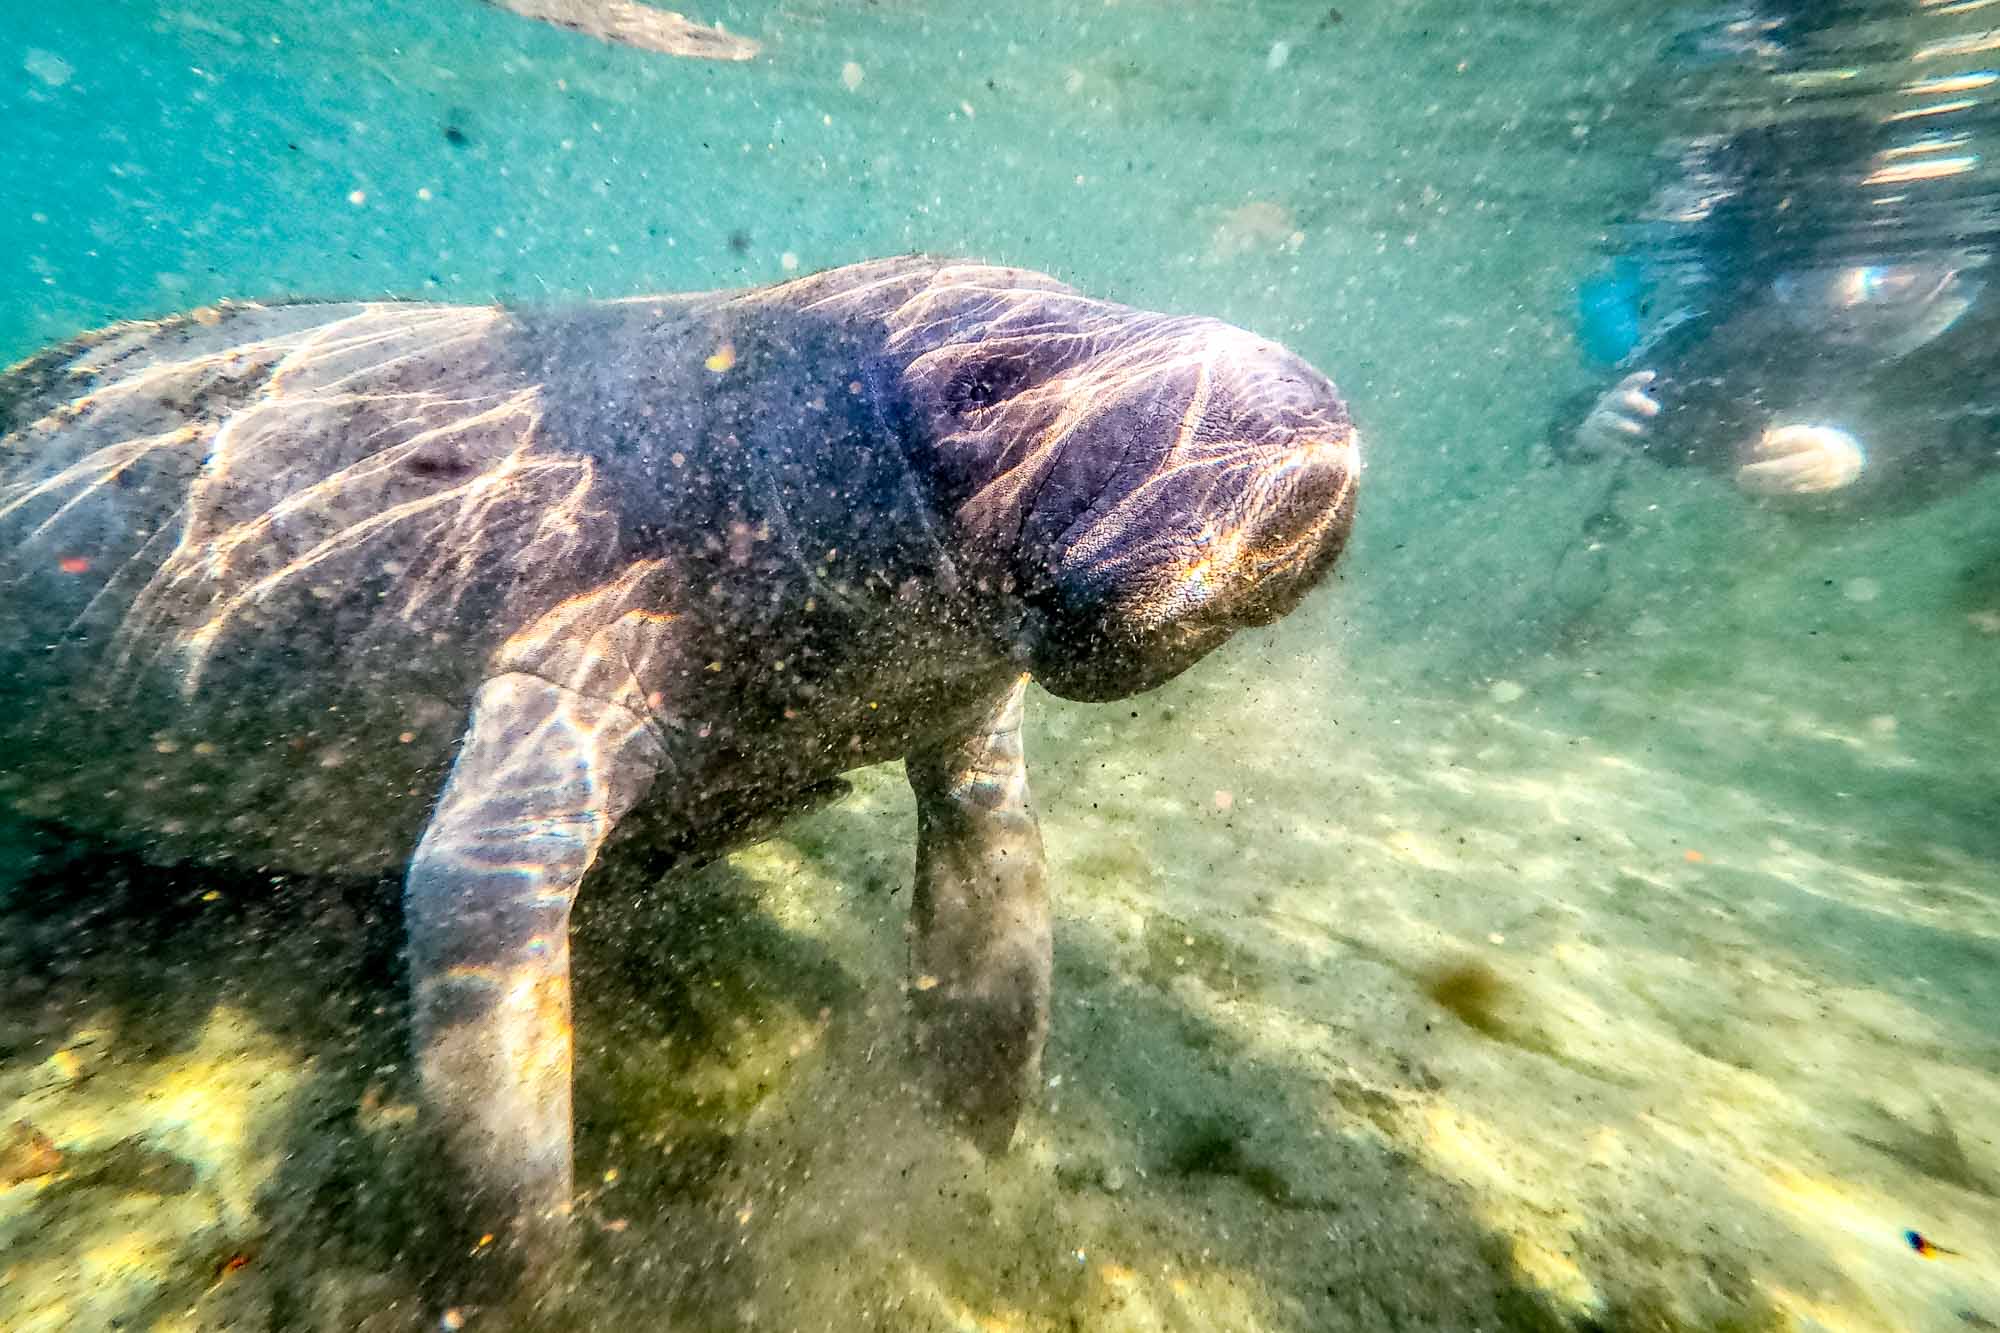 Snorkeler taking picture of manatee under water